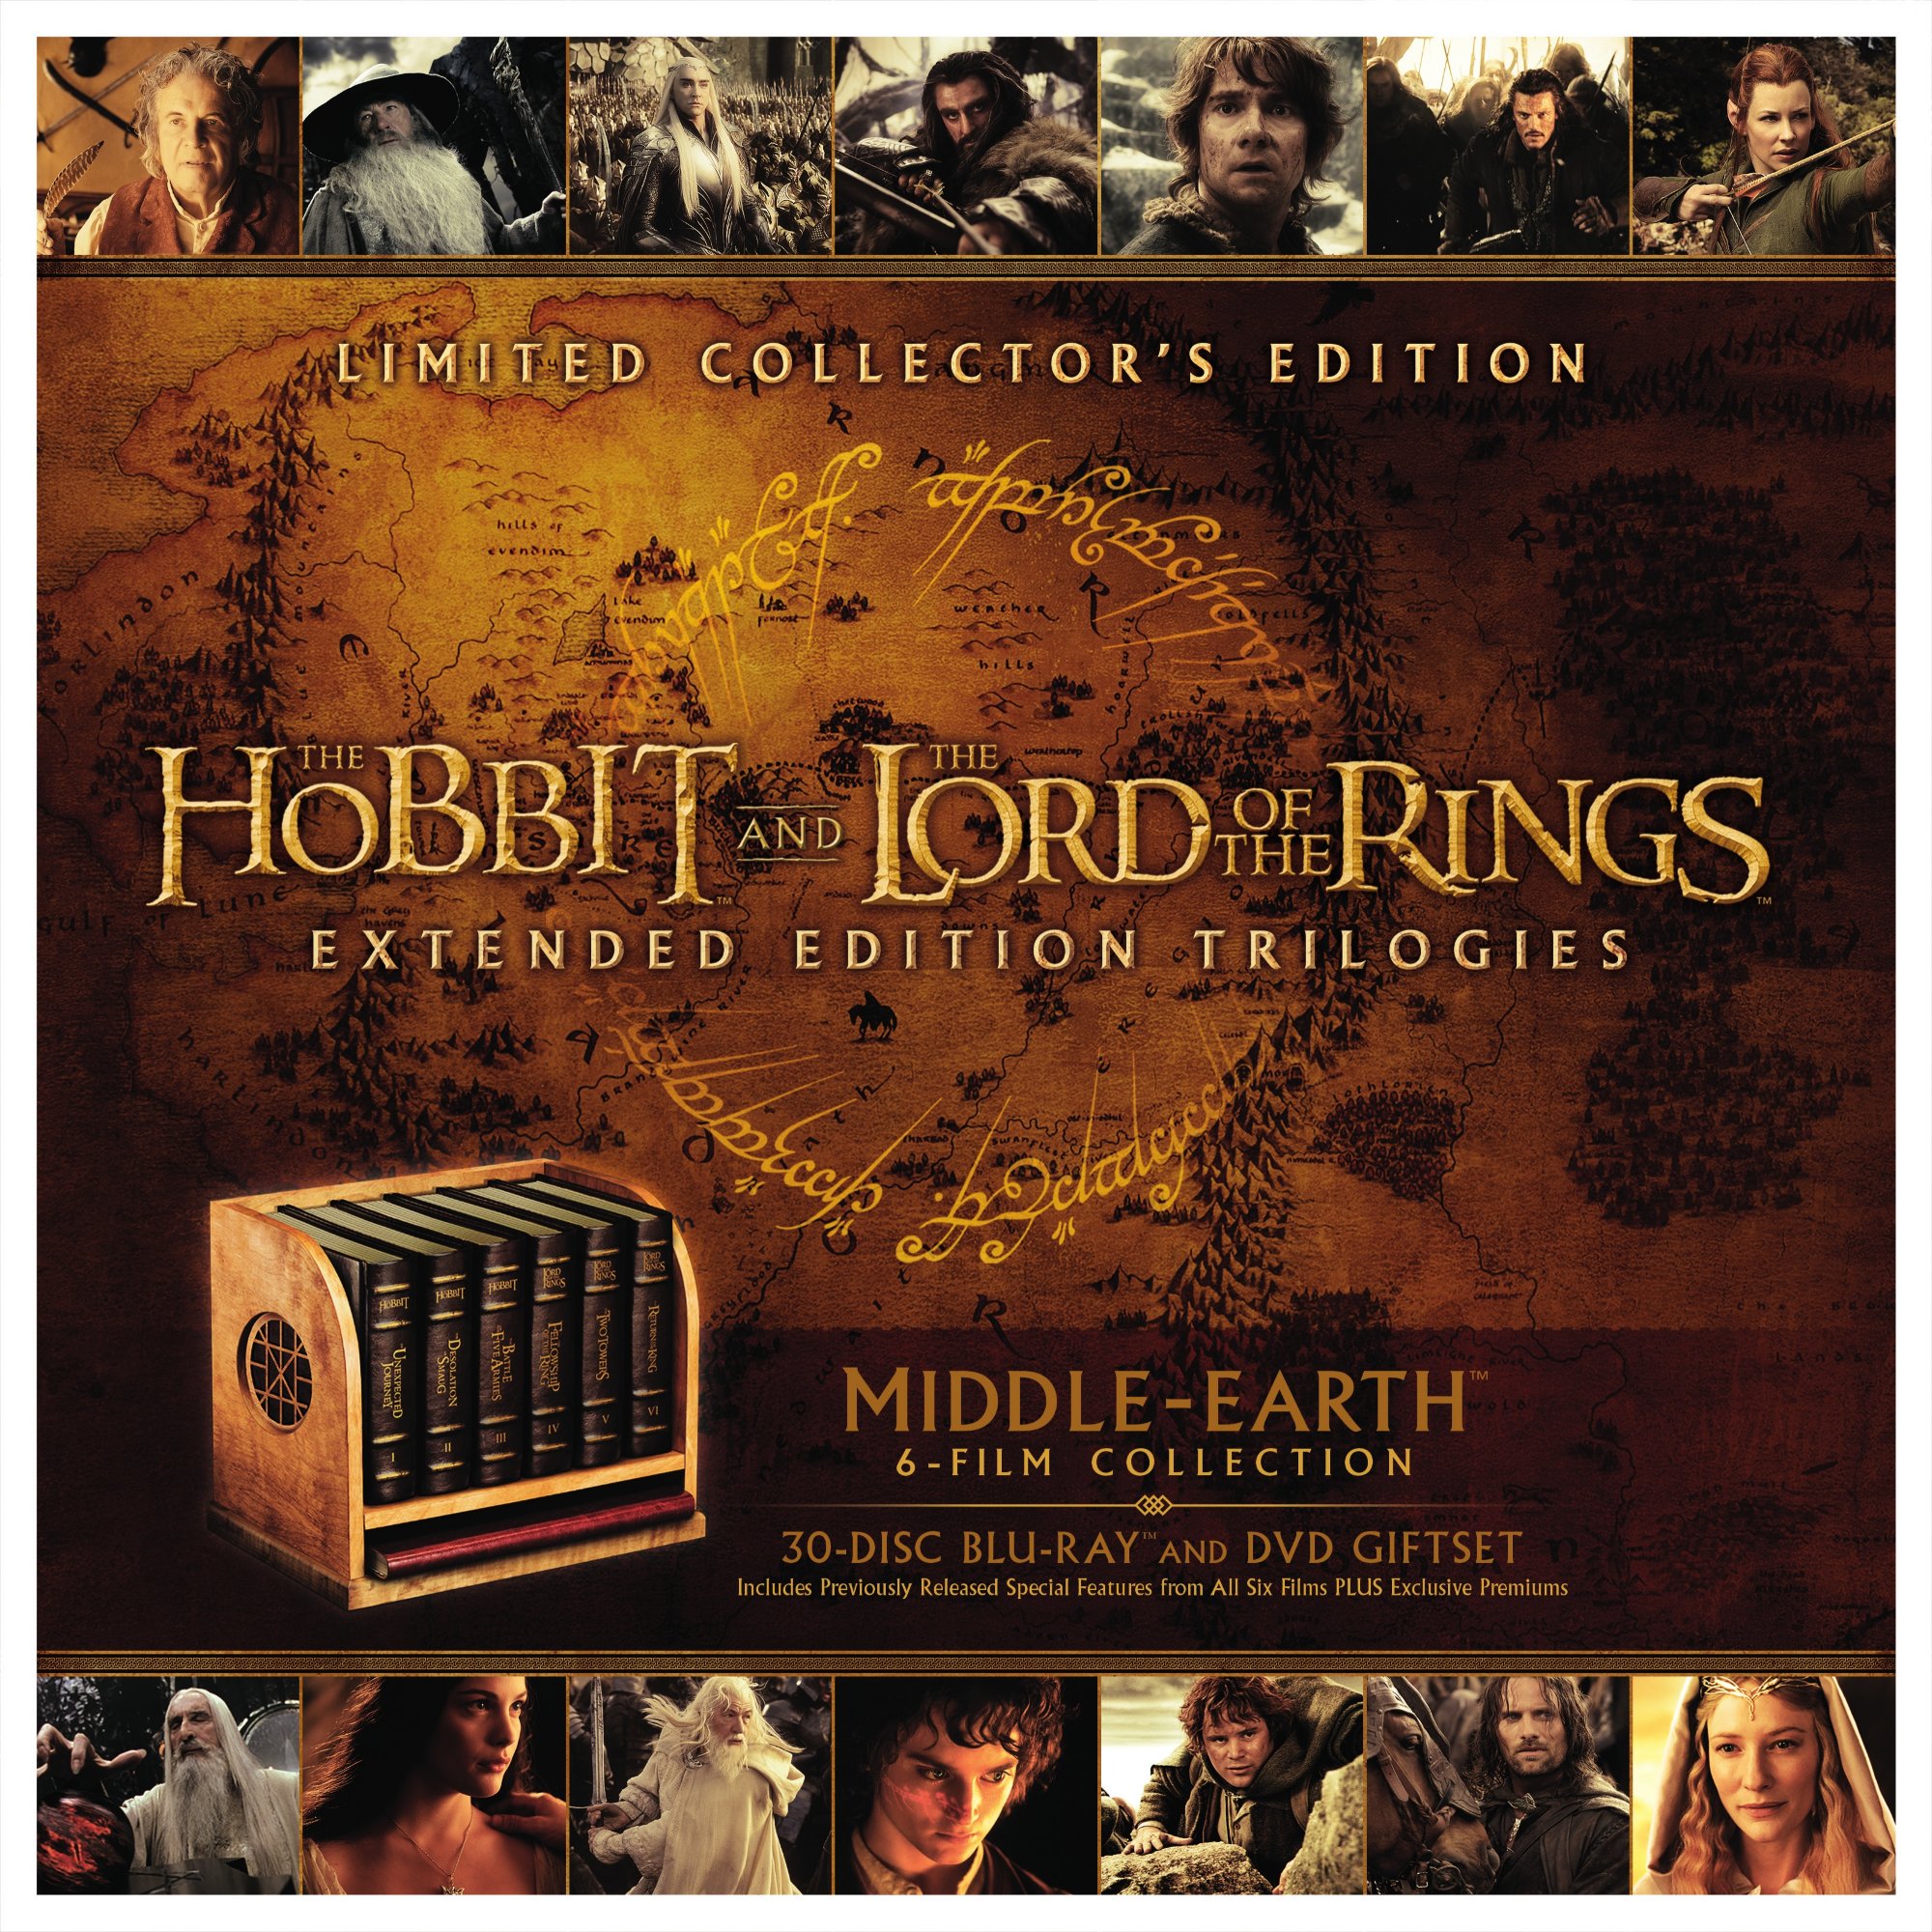 Anekdote Tactiel gevoel eetpatroon The nuts and bolts info on the new Middle-earth 6-film collection release